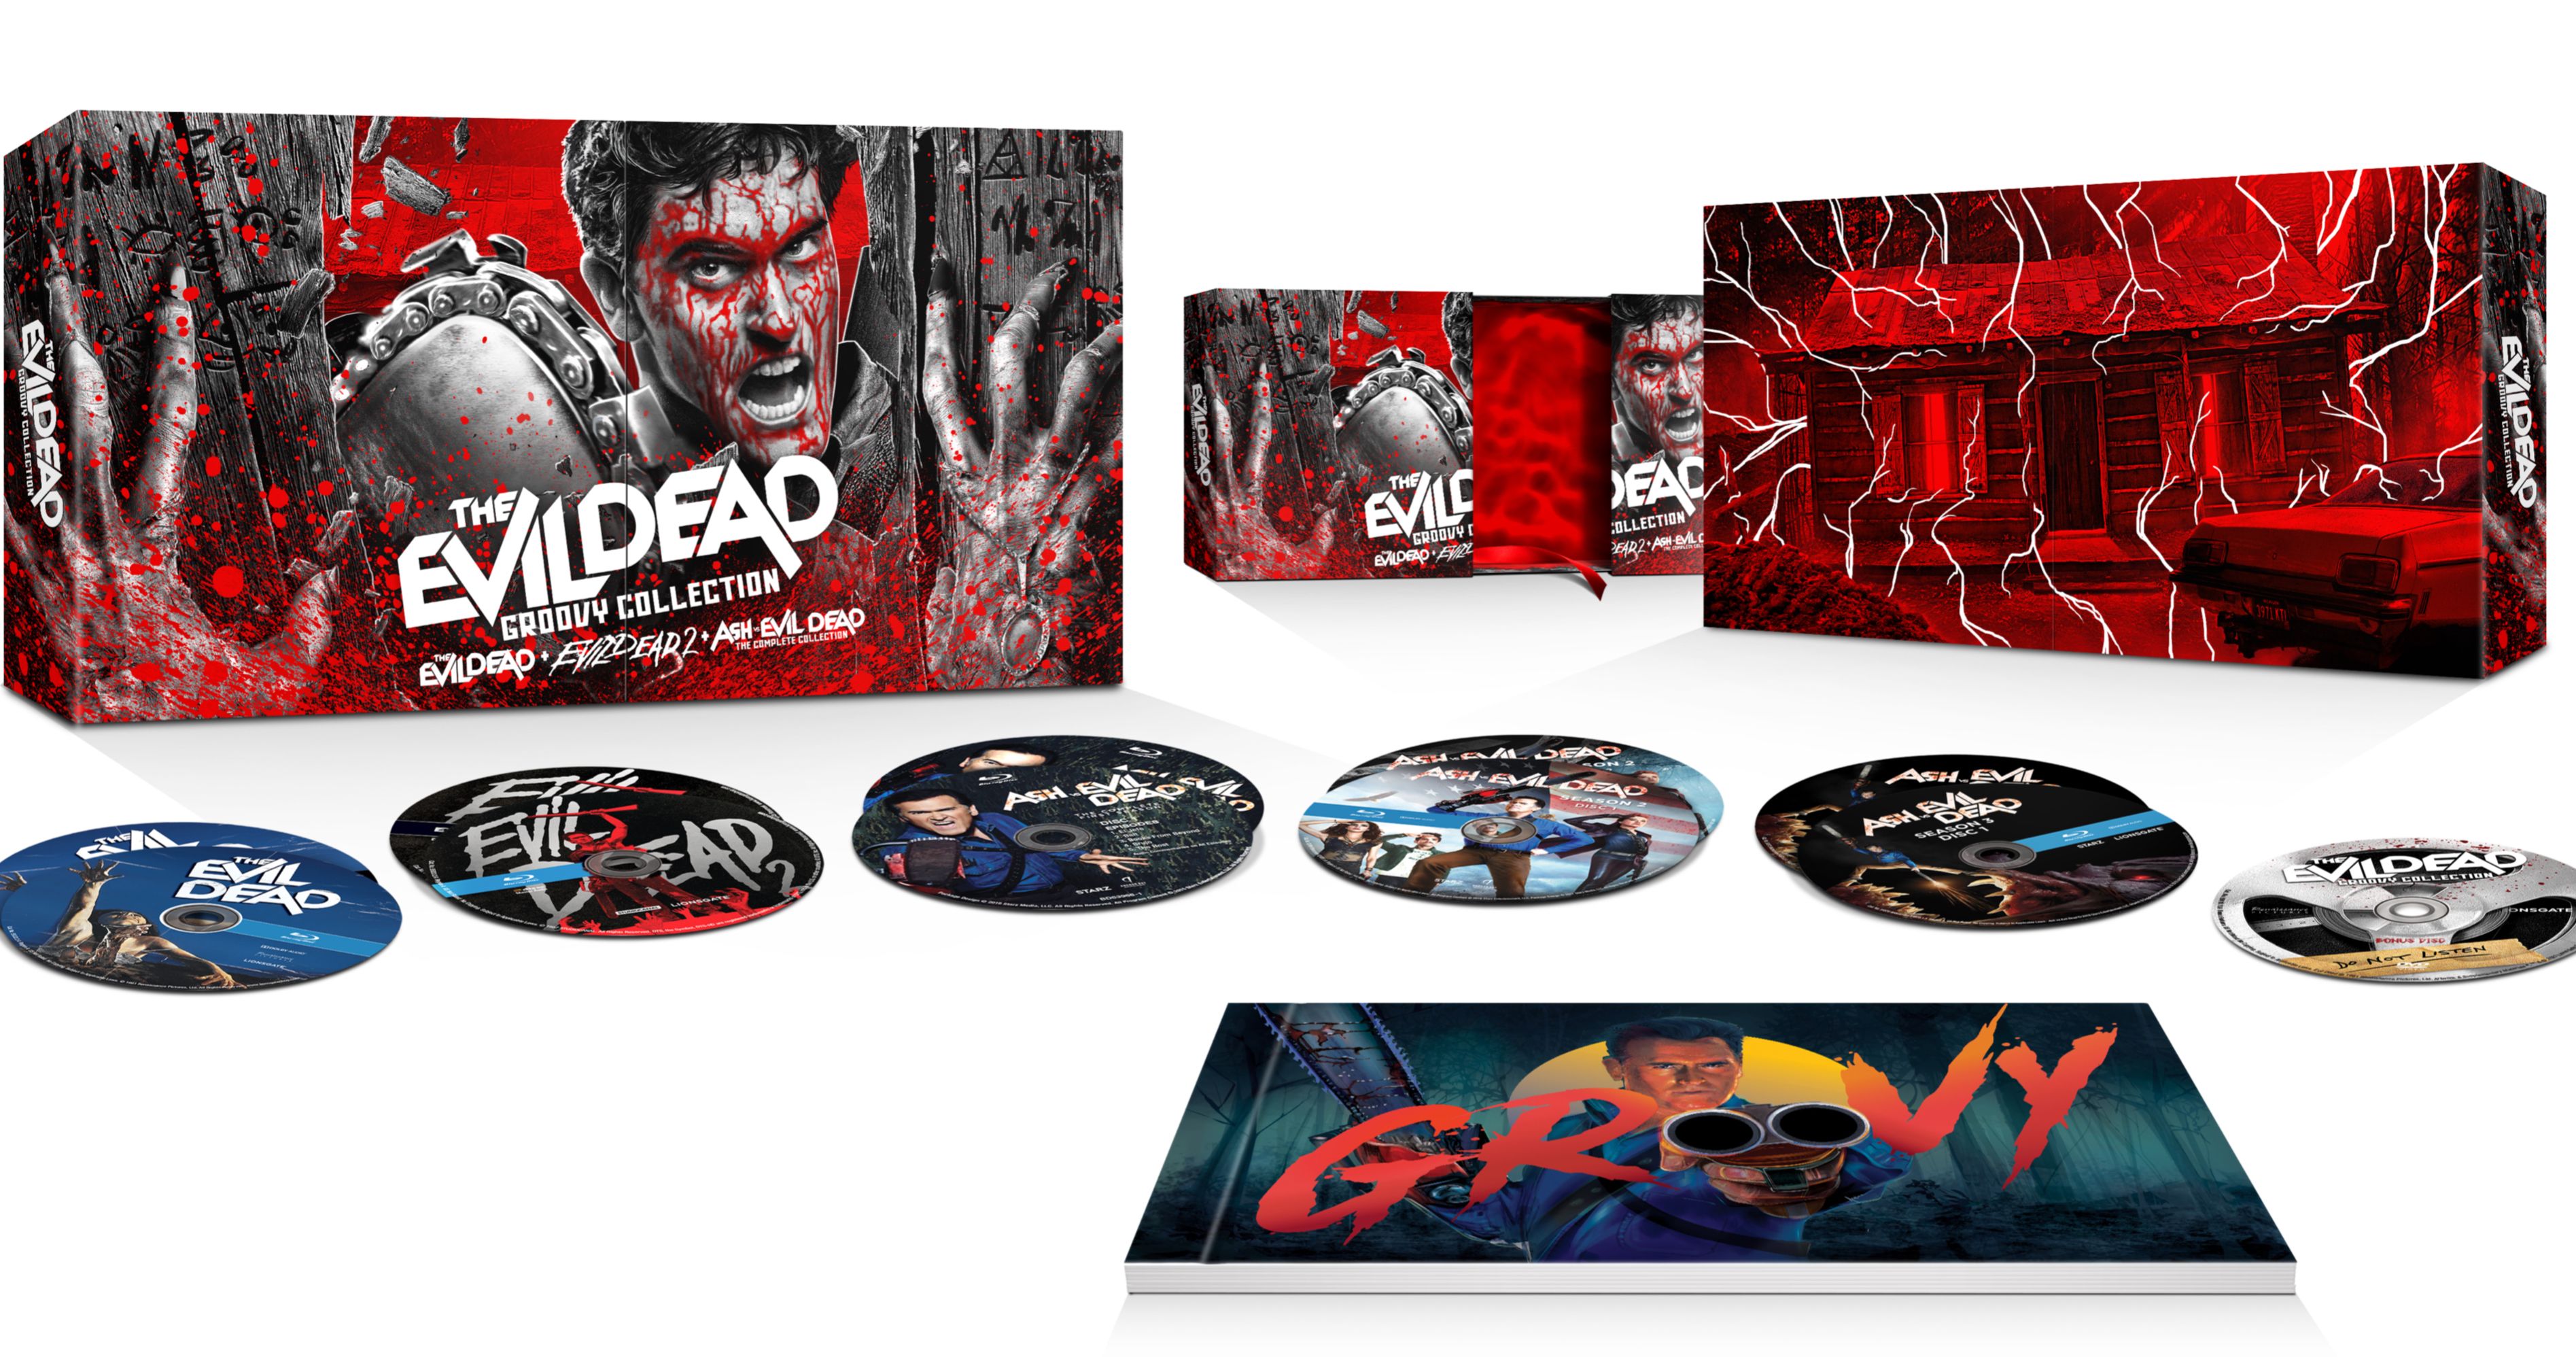 The Evil Dead Groovy Collection Brings the Movies and TV Show to 4K Ultra HD This November